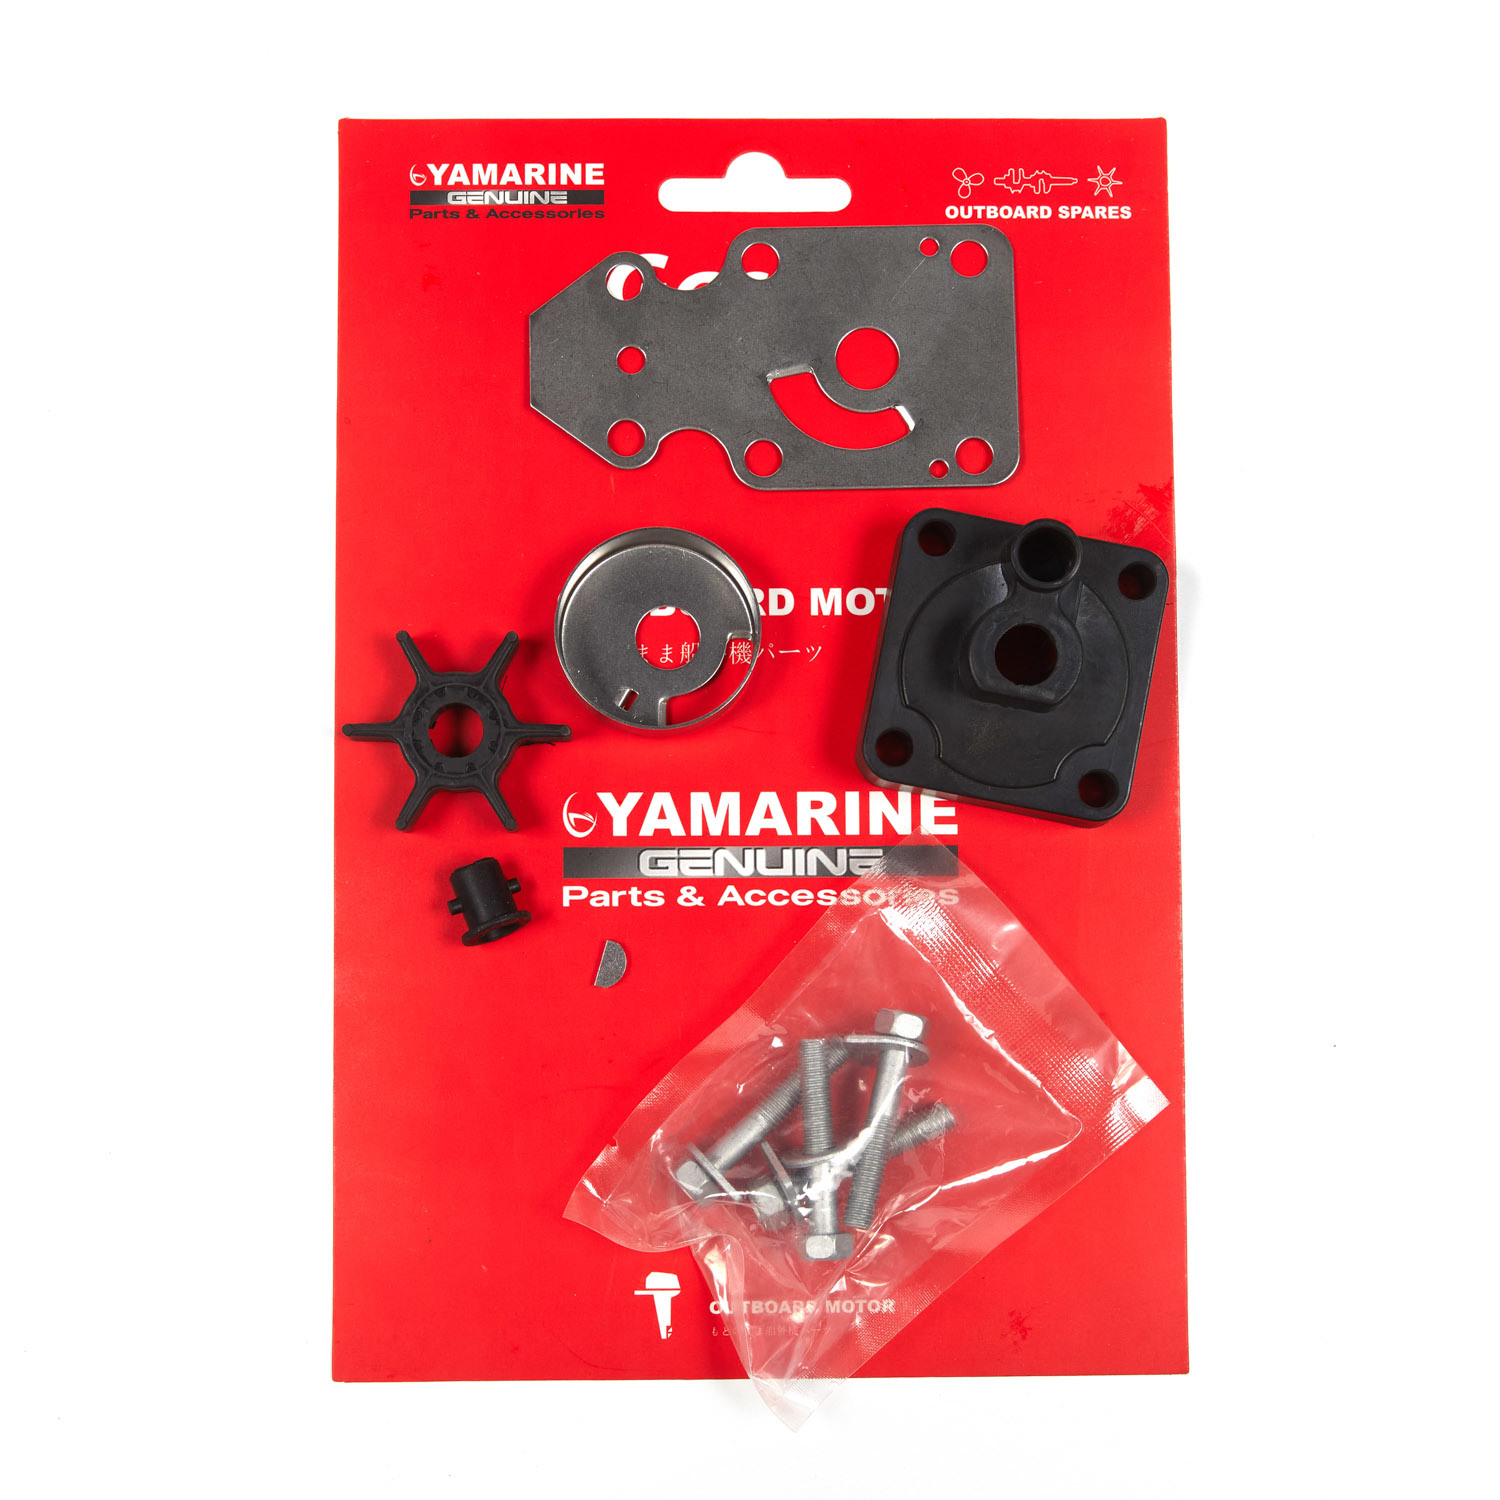 Yamarine Outboard Water Pump Repair Kit 63V-W0078-00 Fit for YAMAHA 9.9/15HP 15fmh Outboard Engine/Motor